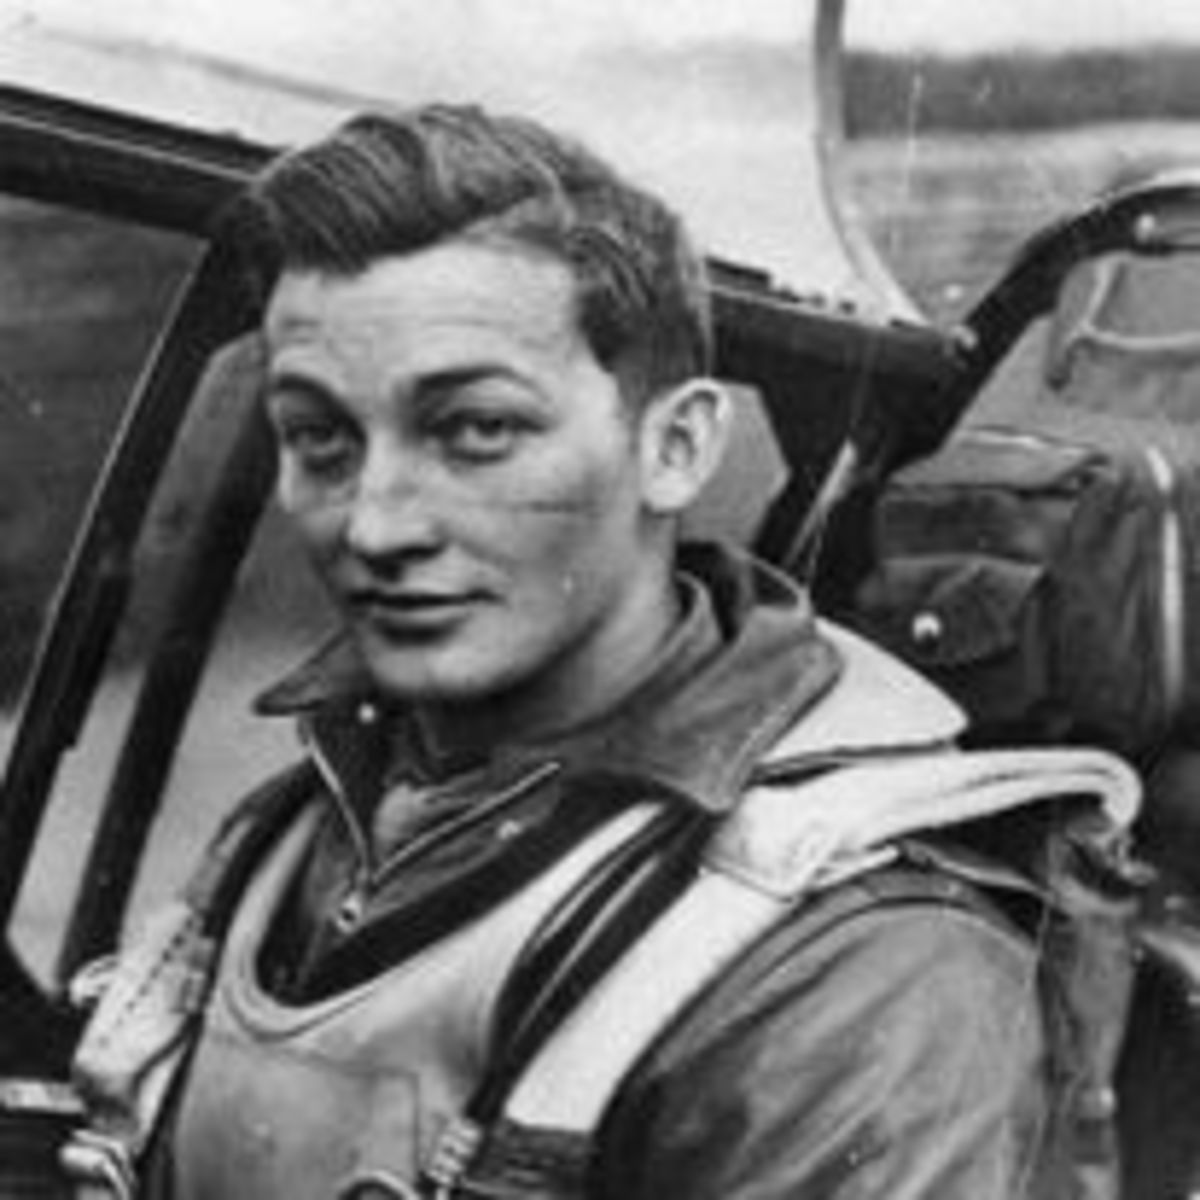 Picture of Howard "John" Moulton after a mission.